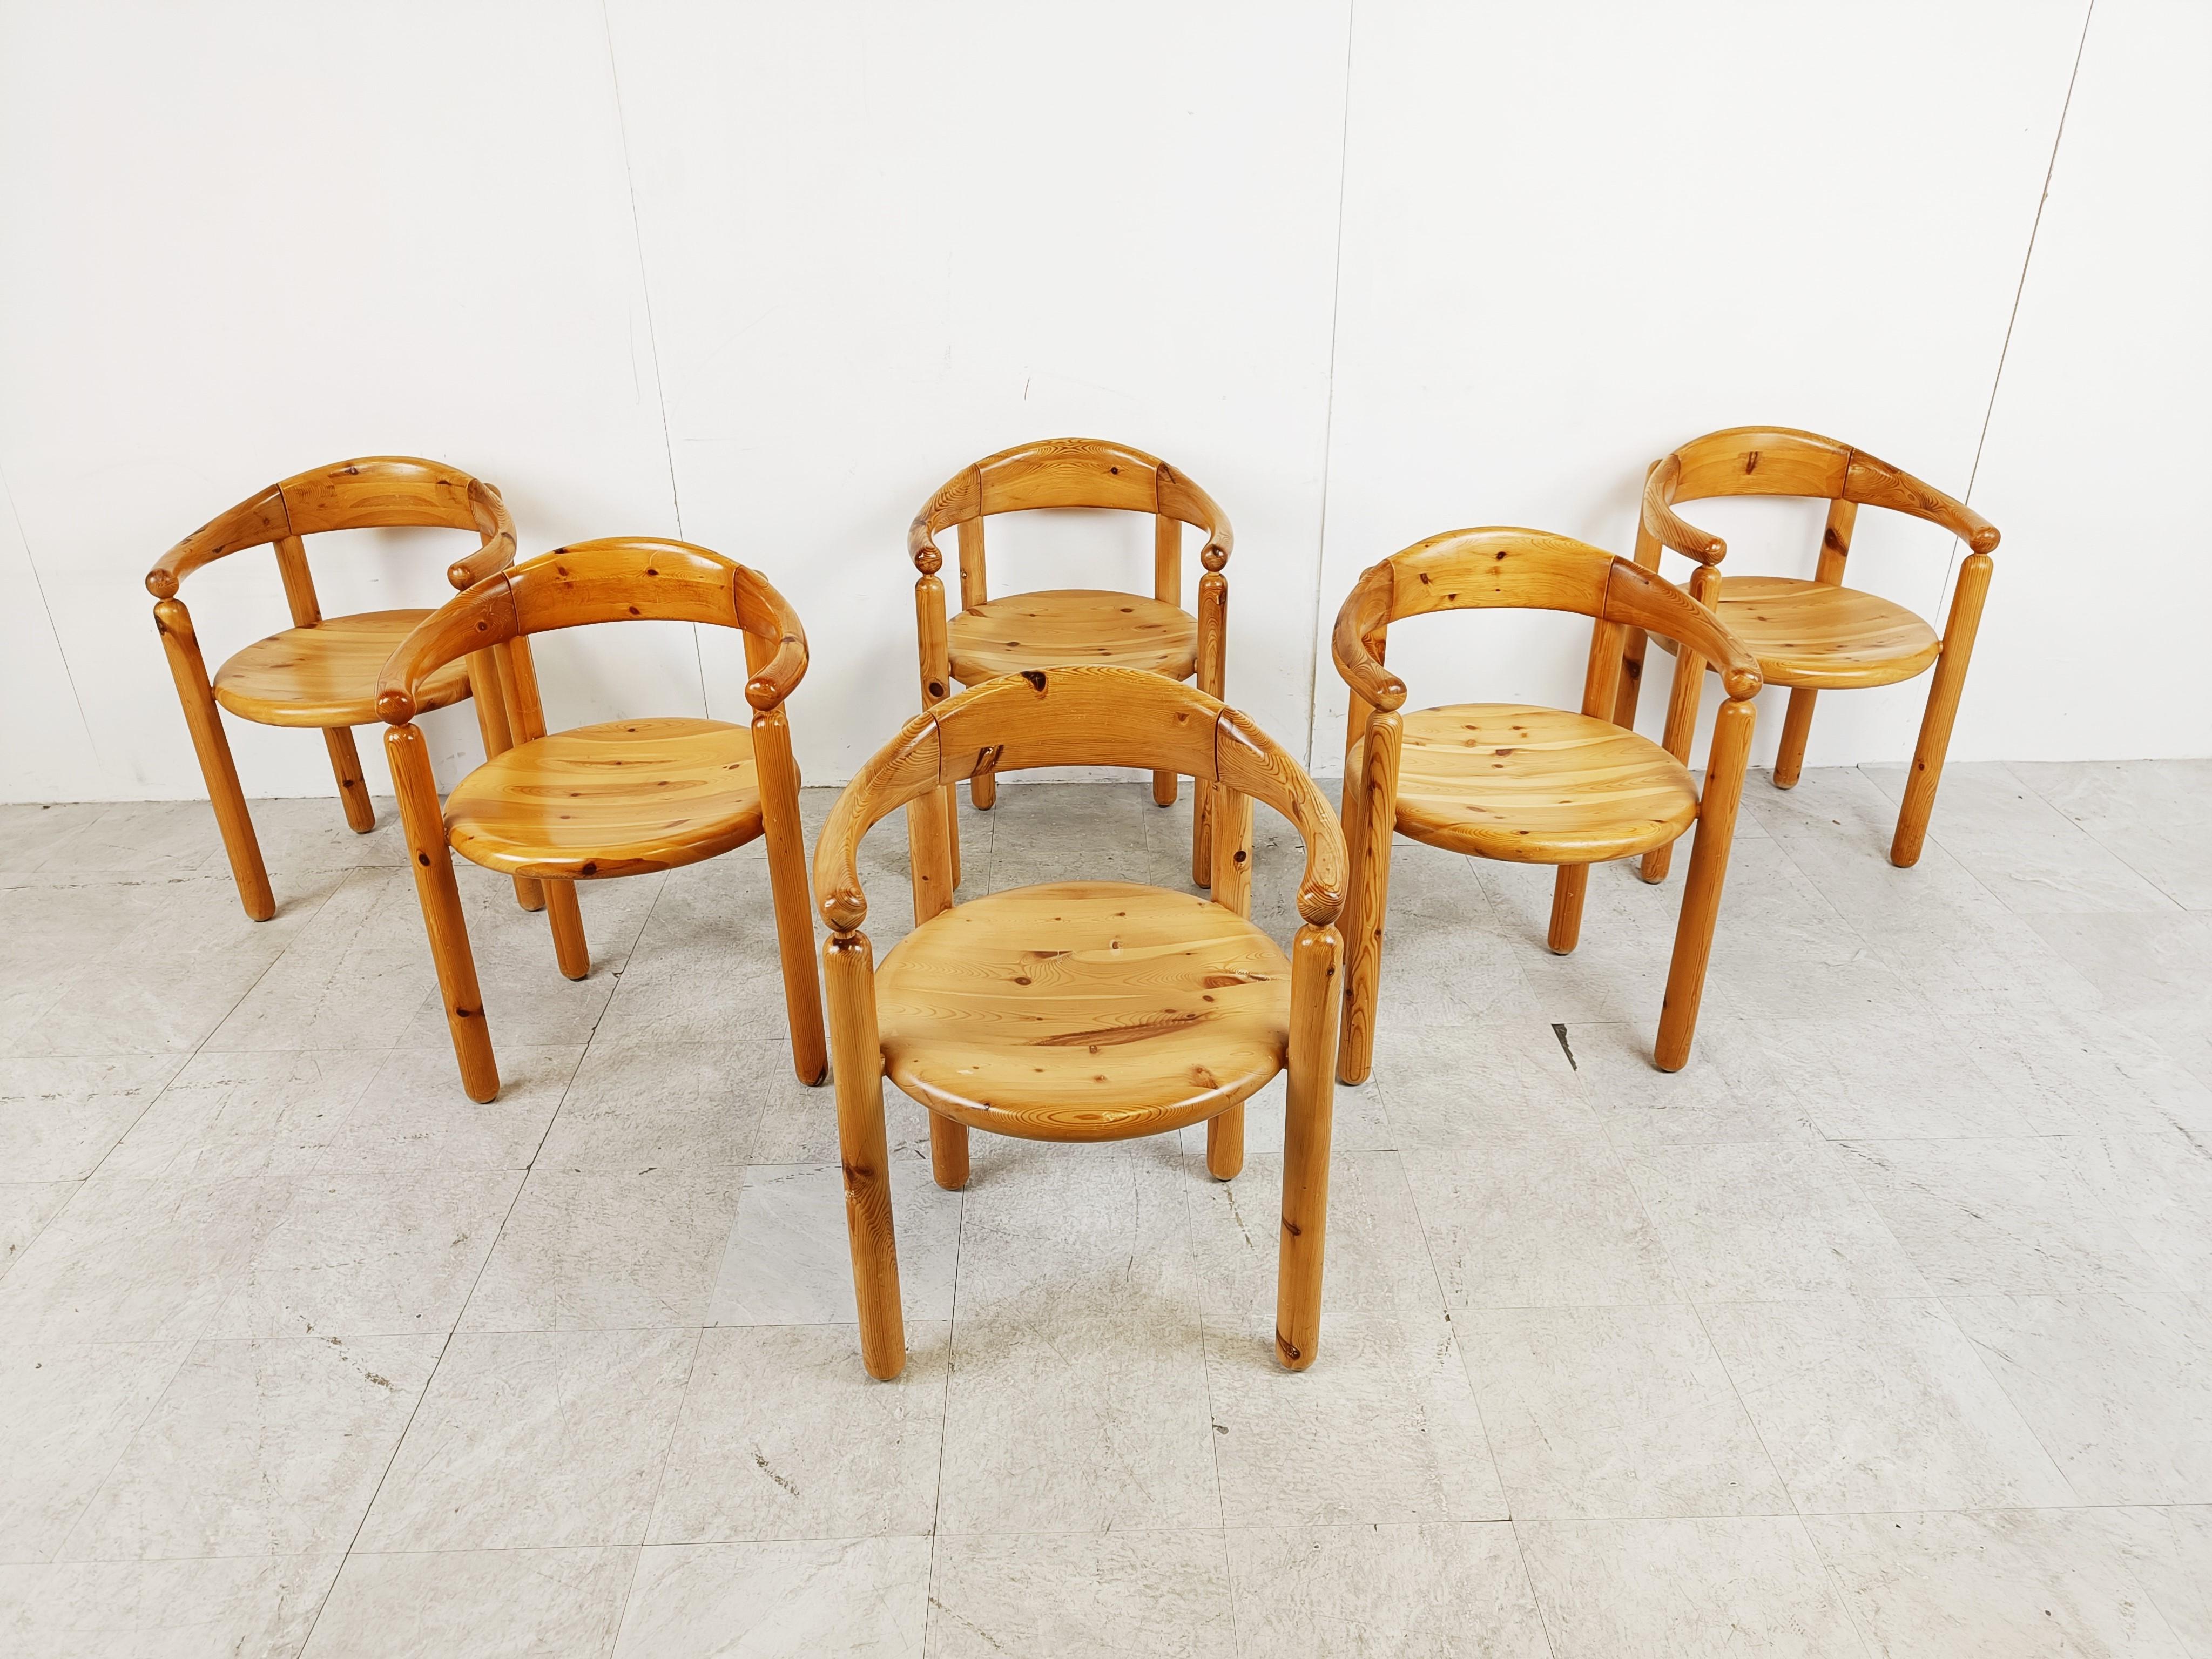 Set of 6 scandinavian solid pine wood dining chairs by Rainer Daumilier for Hirtshals Savvaerk

The chairs are in good condition.

Nicely shaped armrests and seats and beautiful natural pine wood pattern all along the chairs

Beautiful